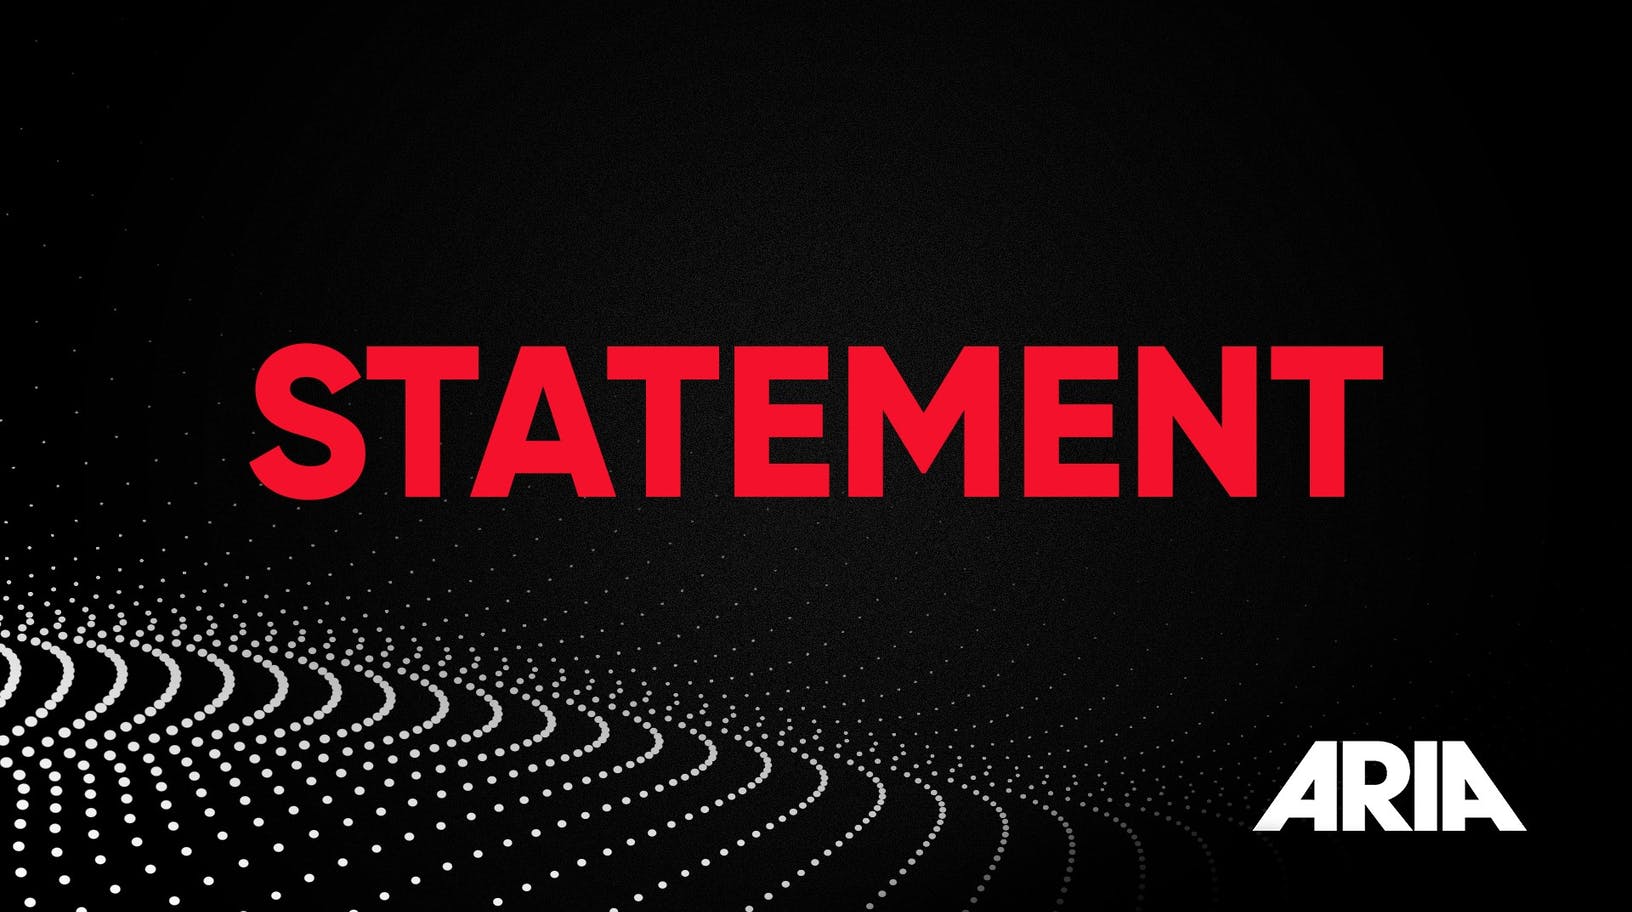 ARIA releases statement in the wake of Four Corners’ Sony Music report as artists stay quiet